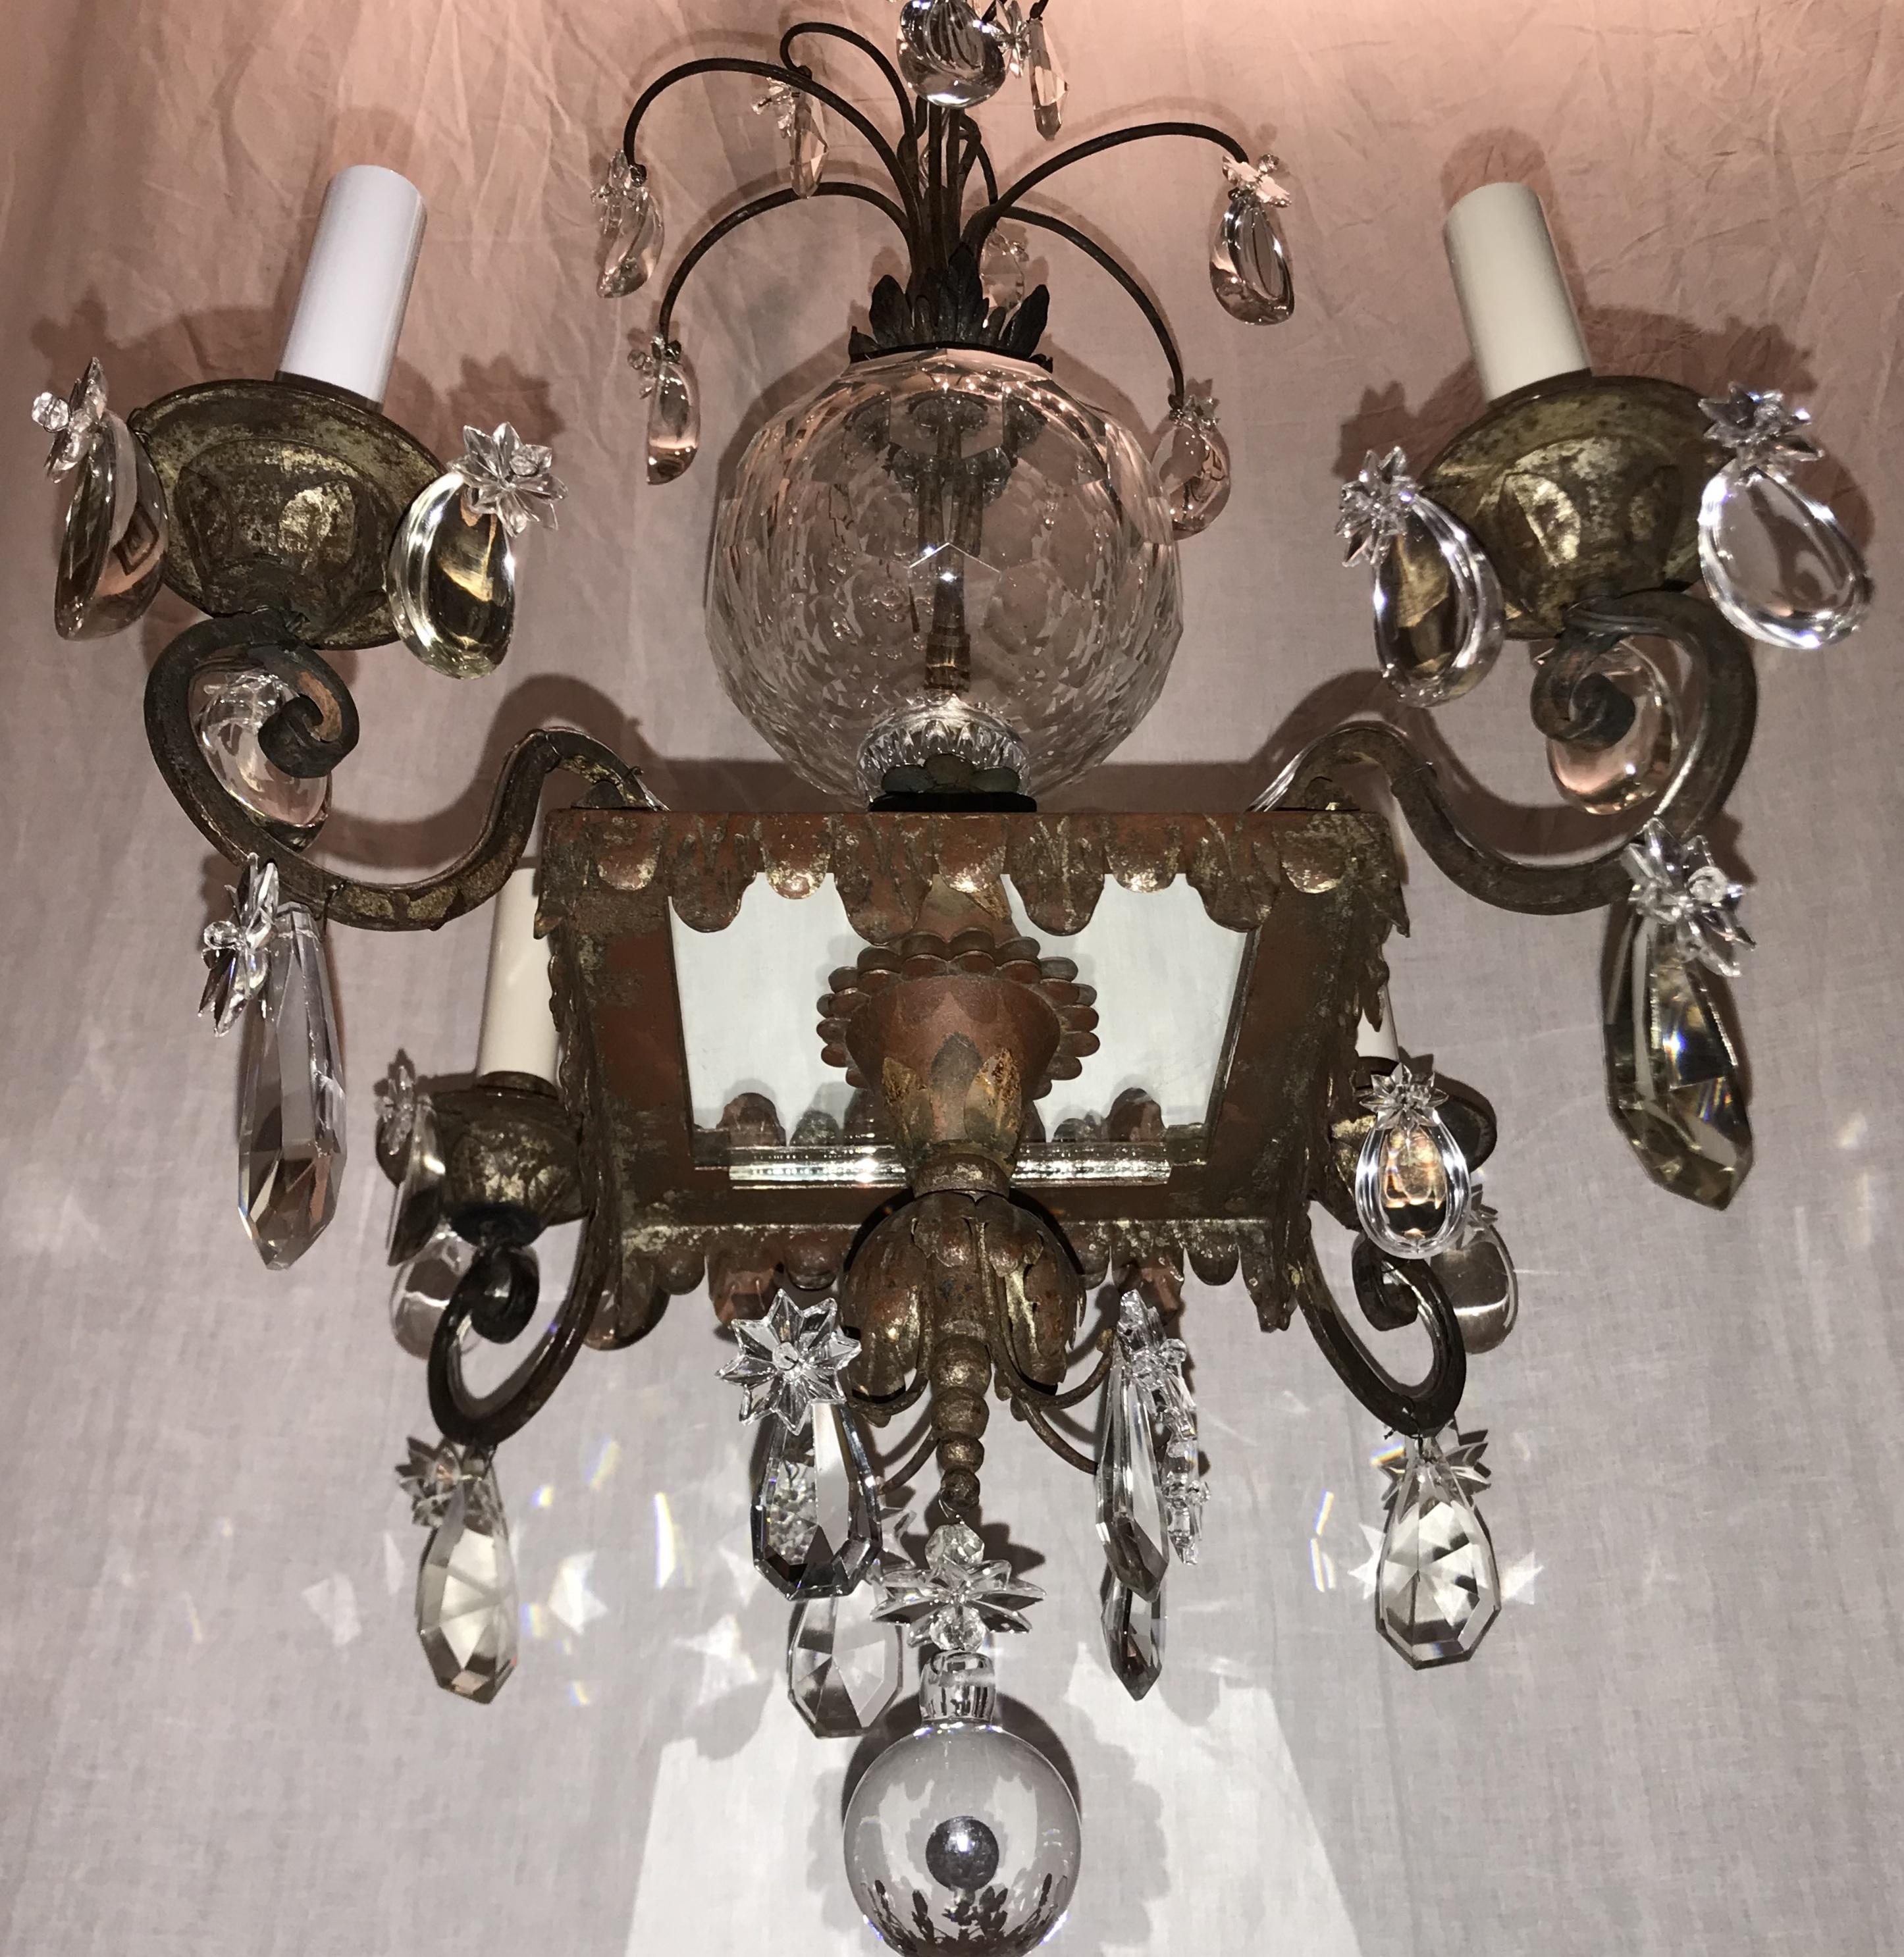 A wonderful Mid-Century Modern vintage French star and large crystal ball centre and embellished with crystal drops, with the original silver gilt square frame mirrored bottom chandelier having four lights, completely rewired.
In the manner and